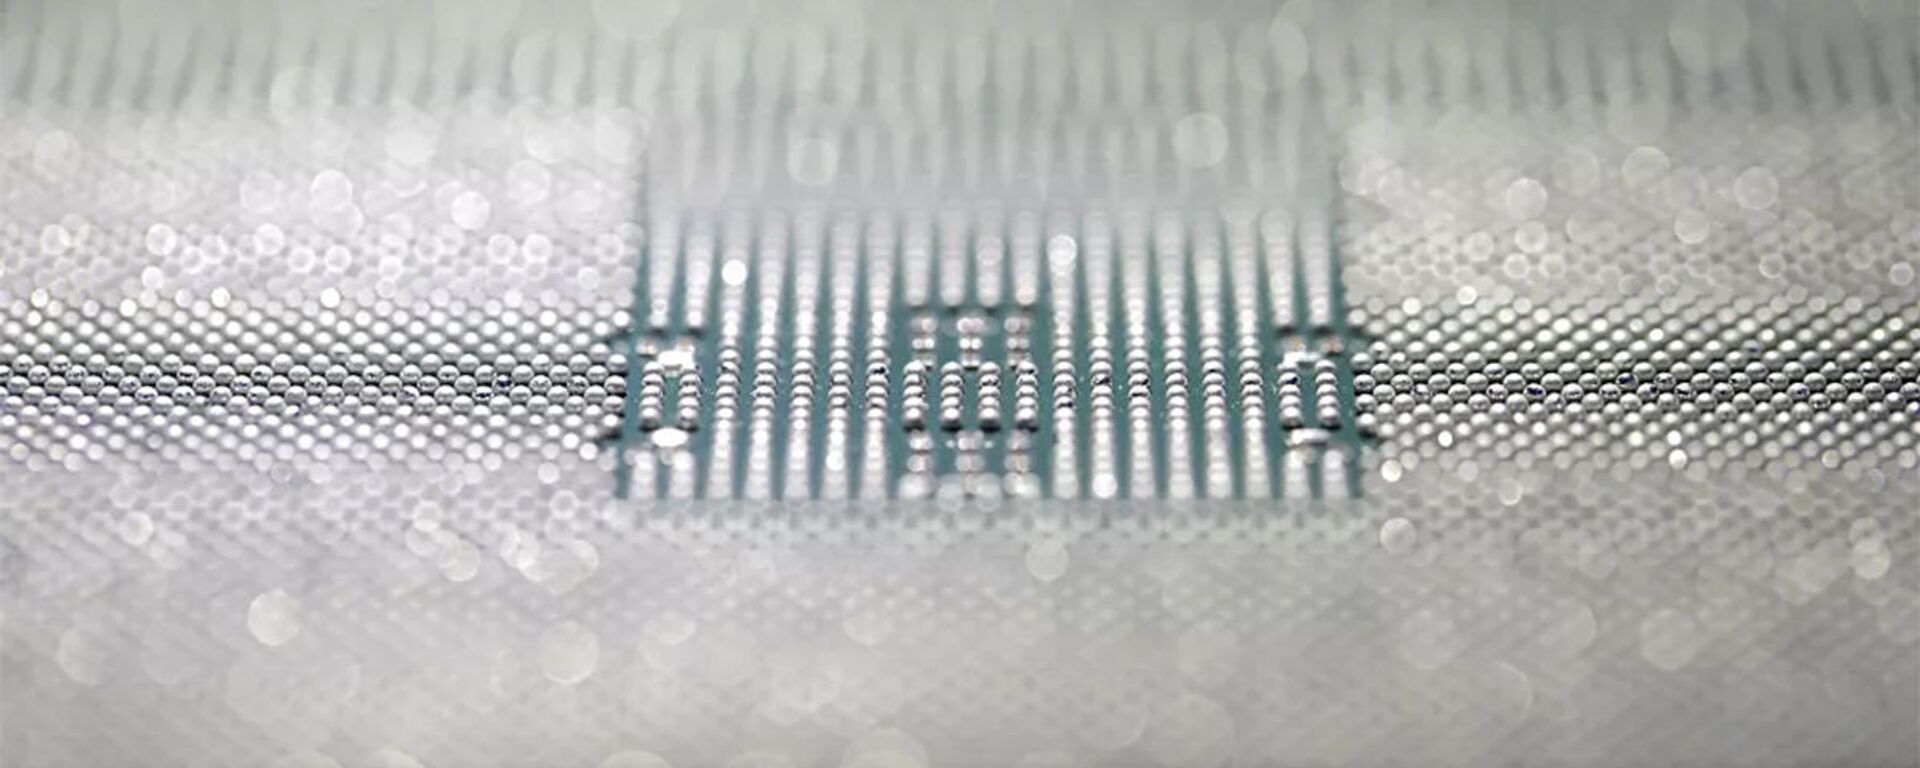 A Kunpeng 920 chip is displayed during an unveiling ceremony in Shenzhen, China, Monday, Jan. 7, 2019. Chinese telecom giant Huawei unveiled a processor chip for data centers and cloud computing as it expands into an emerging global market despite Western warnings the company might be a security risk.  - 俄罗斯卫星通讯社, 1920, 21.06.2021